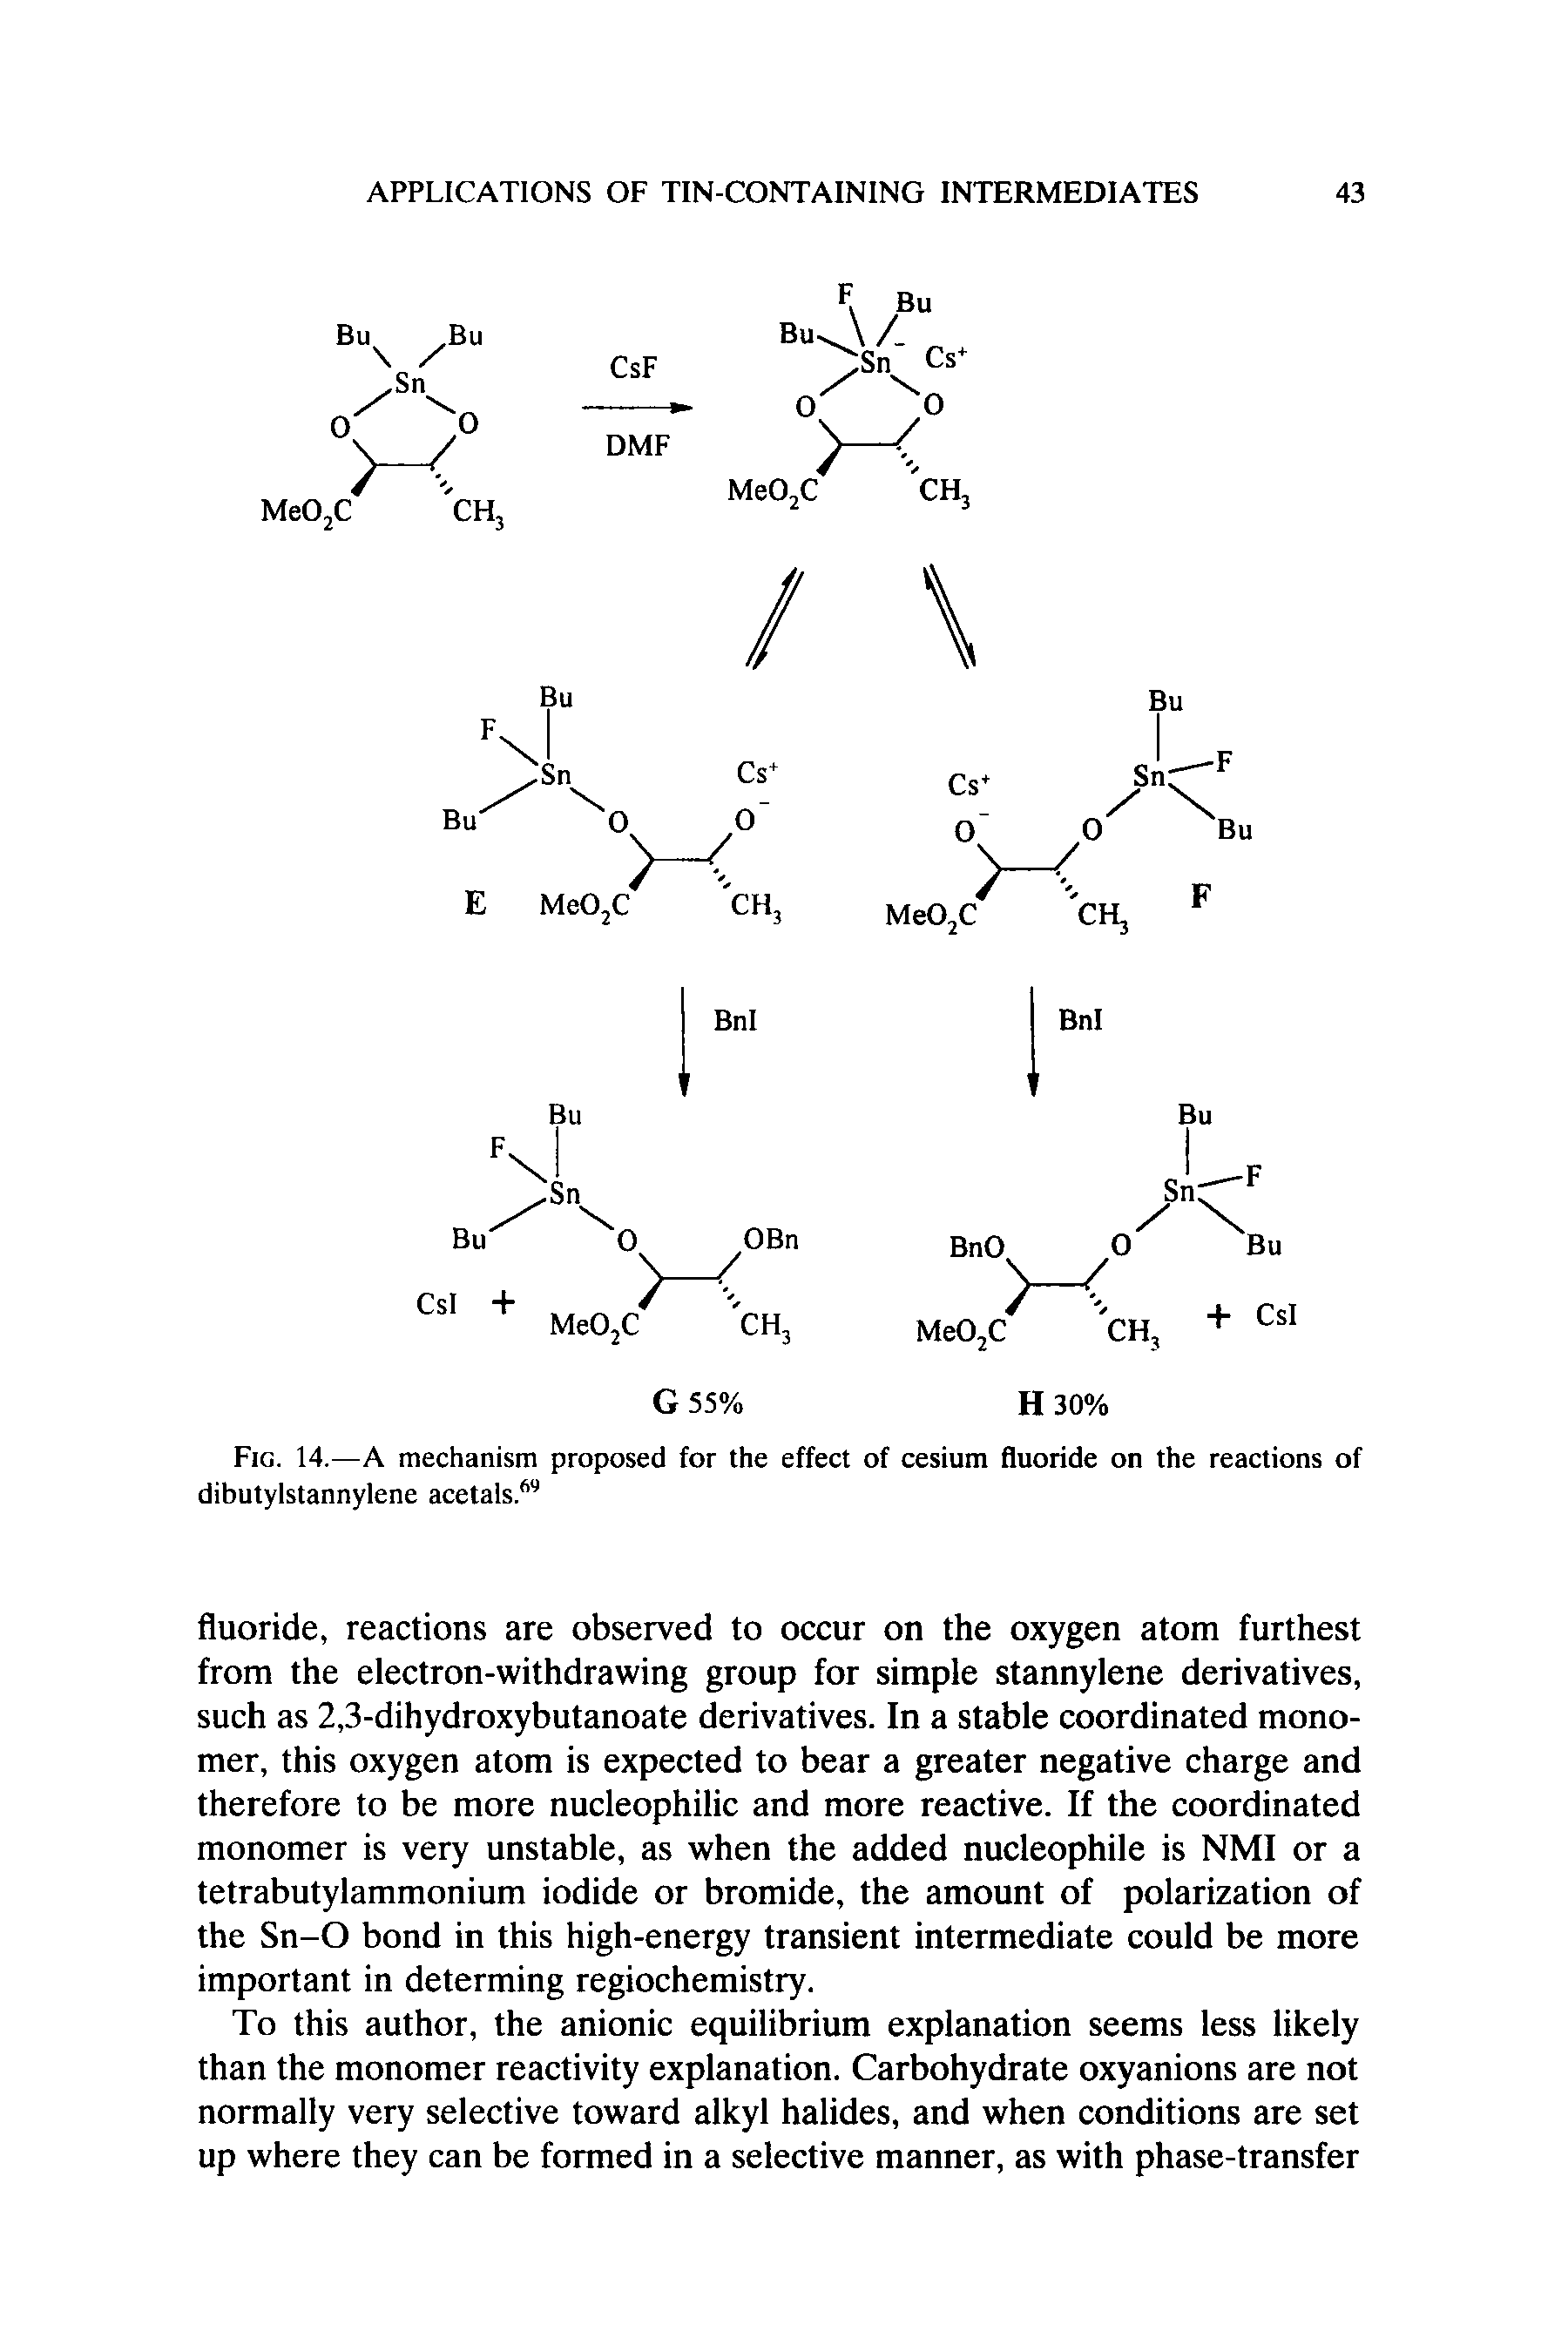 Fig. 14.—A mechanism proposed for the effect of cesium fluoride on the reactions of dibutylstannylene acetals.69...